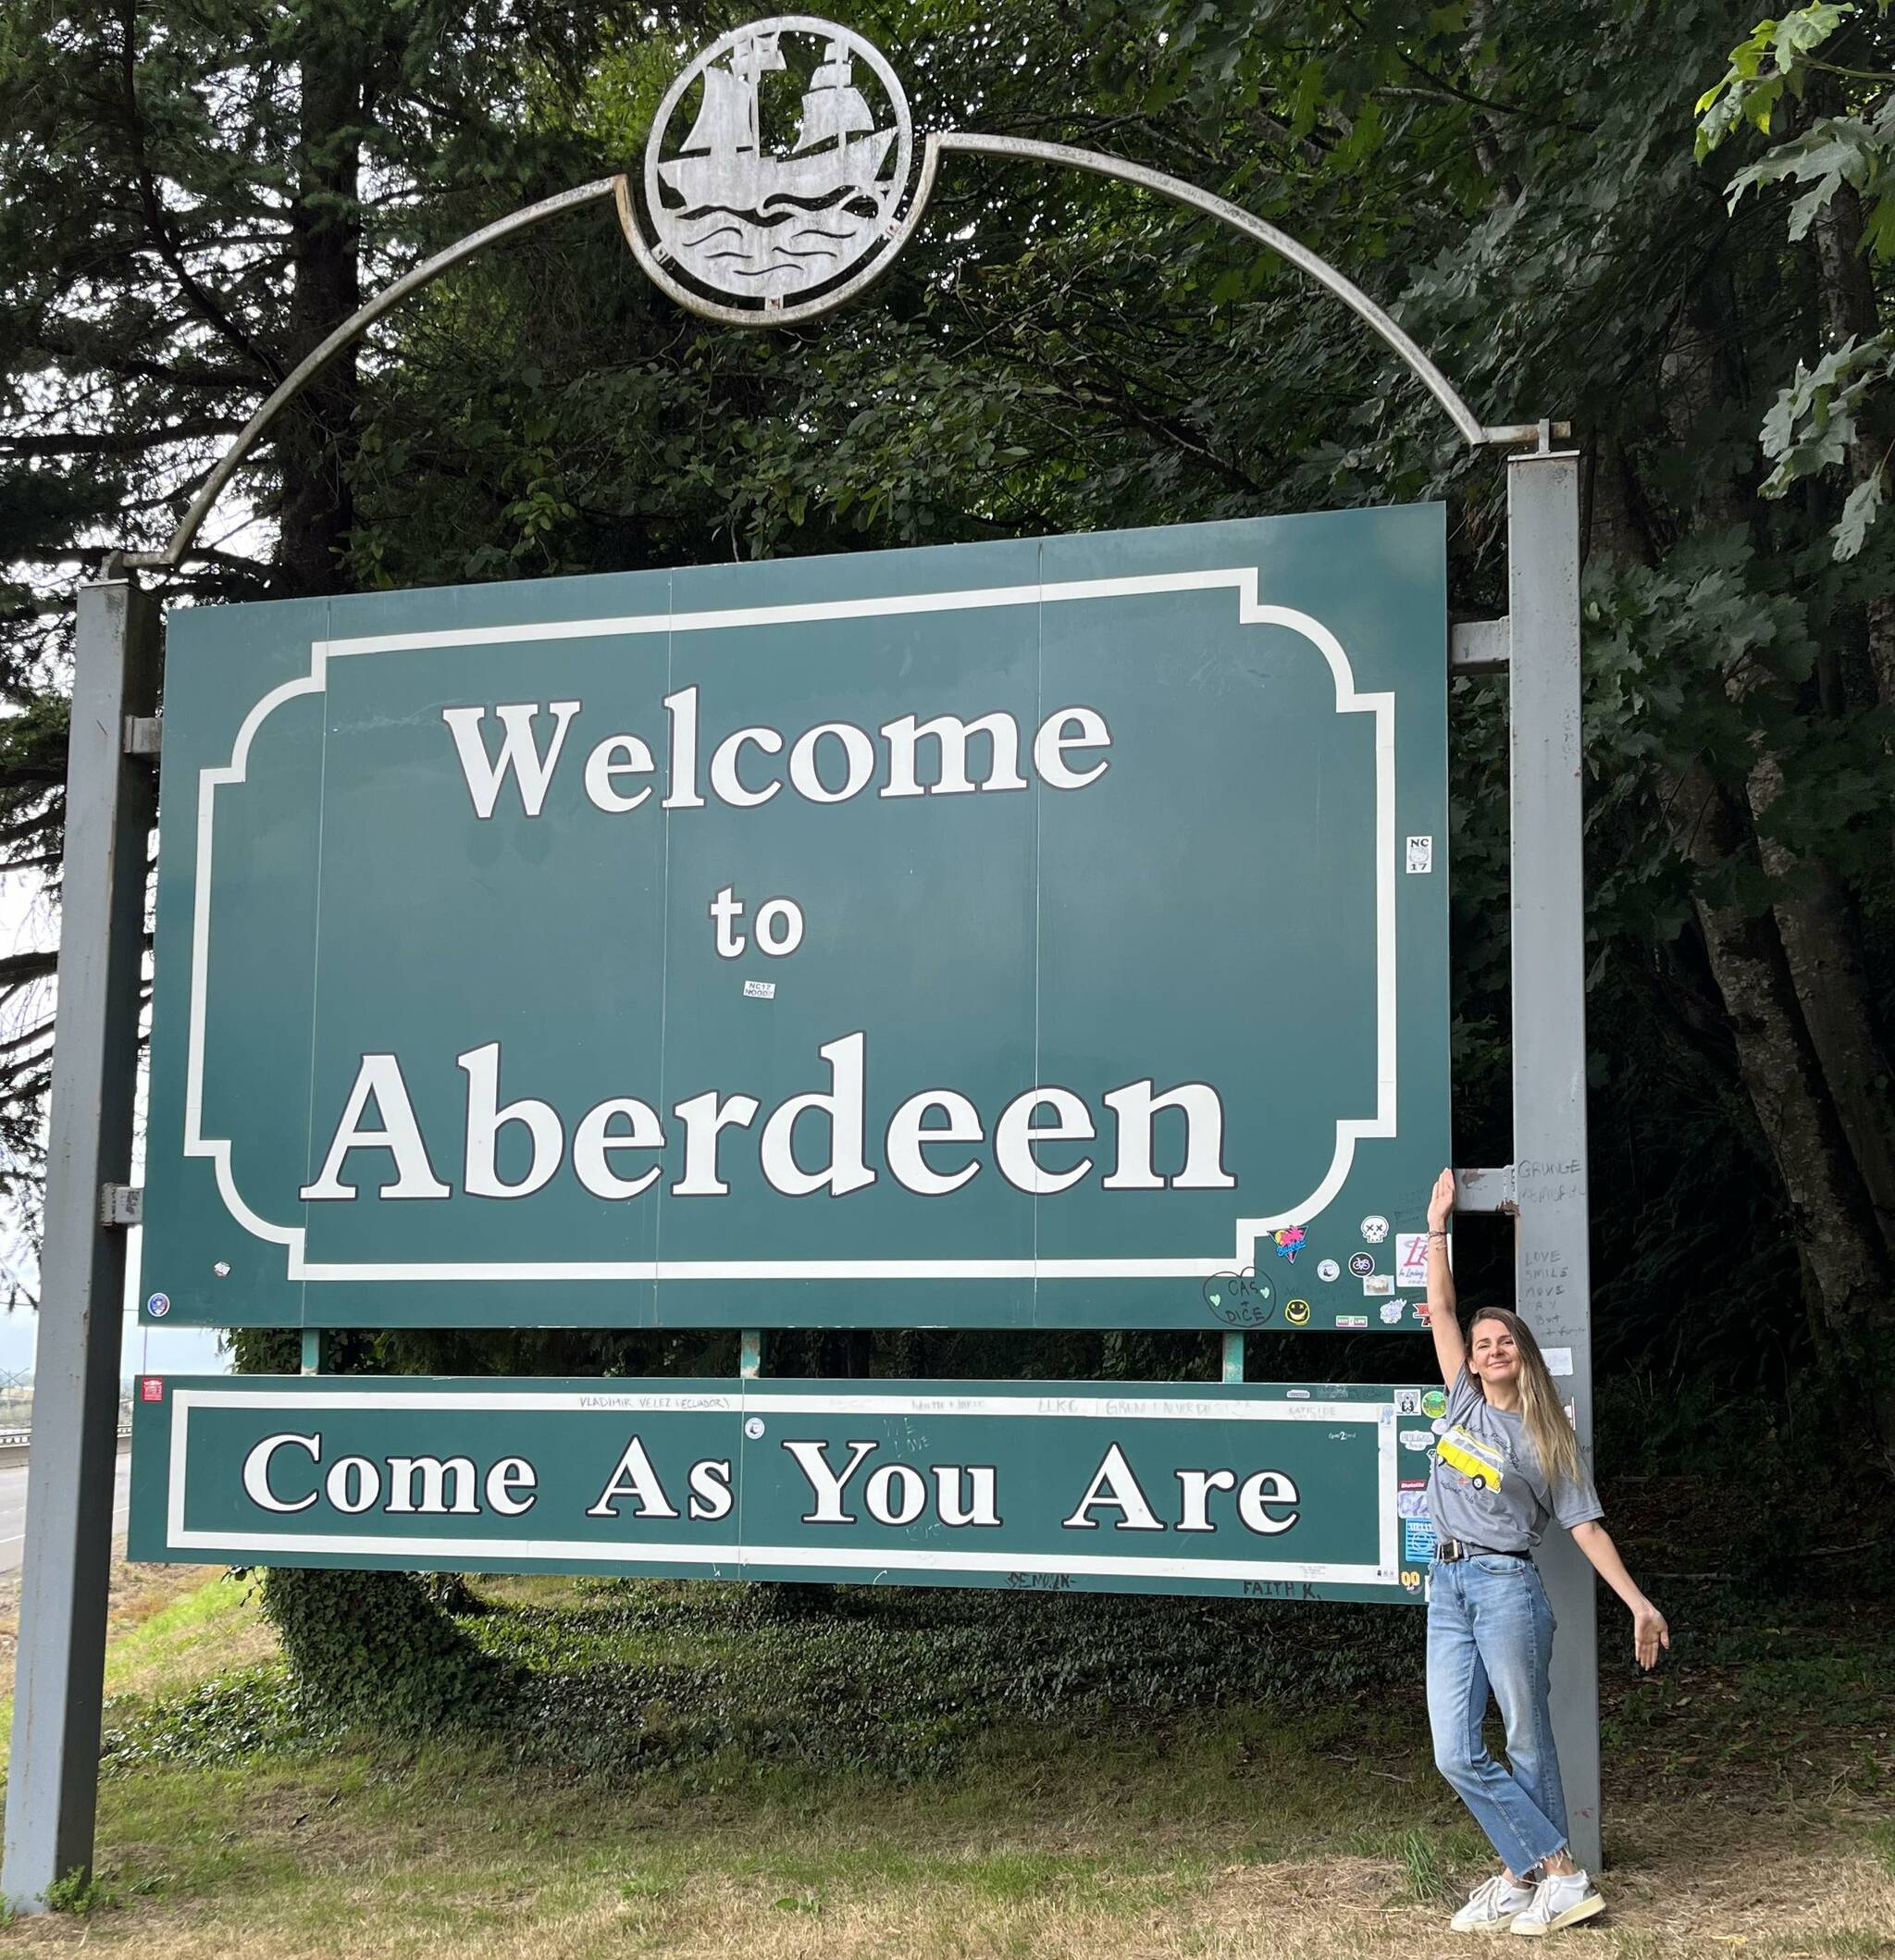 Provided photo
A friend captures Zoé Roux’s spirit at the “Welcome to Aberdeen” sign. Roux, who studied as a junior at Aberdeen High School during the 2015-16 school year as part of the Aberdeen Rotary Club’s Long-Term Exchange Program, shows the positive energy she exudes in a recent visit back to Grays Harbor.